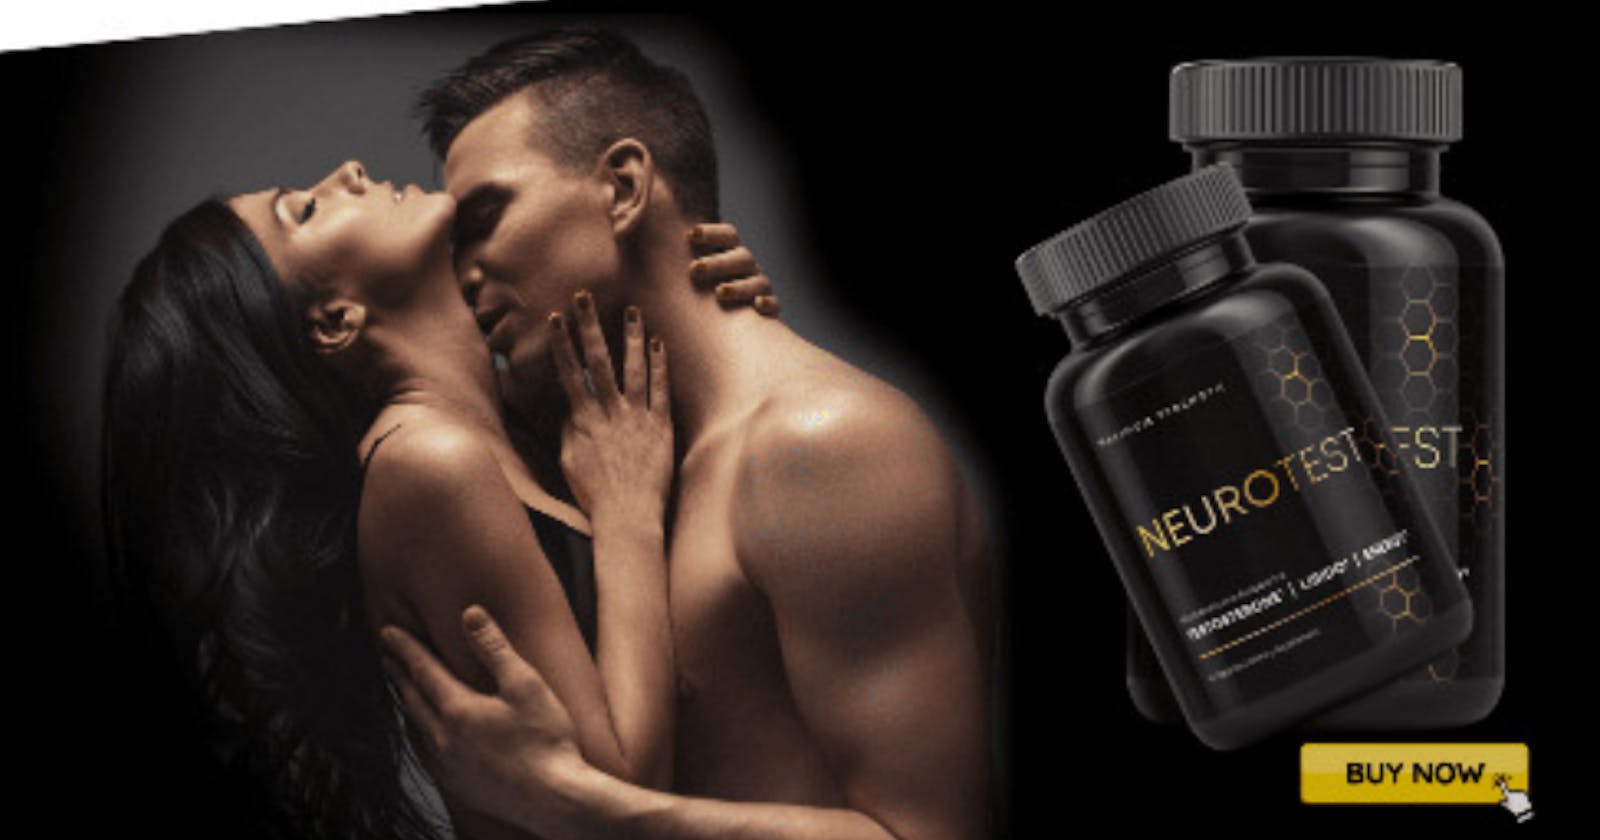 Neurotest Male Enhancement Reviews Works? The Ultimate Solution!